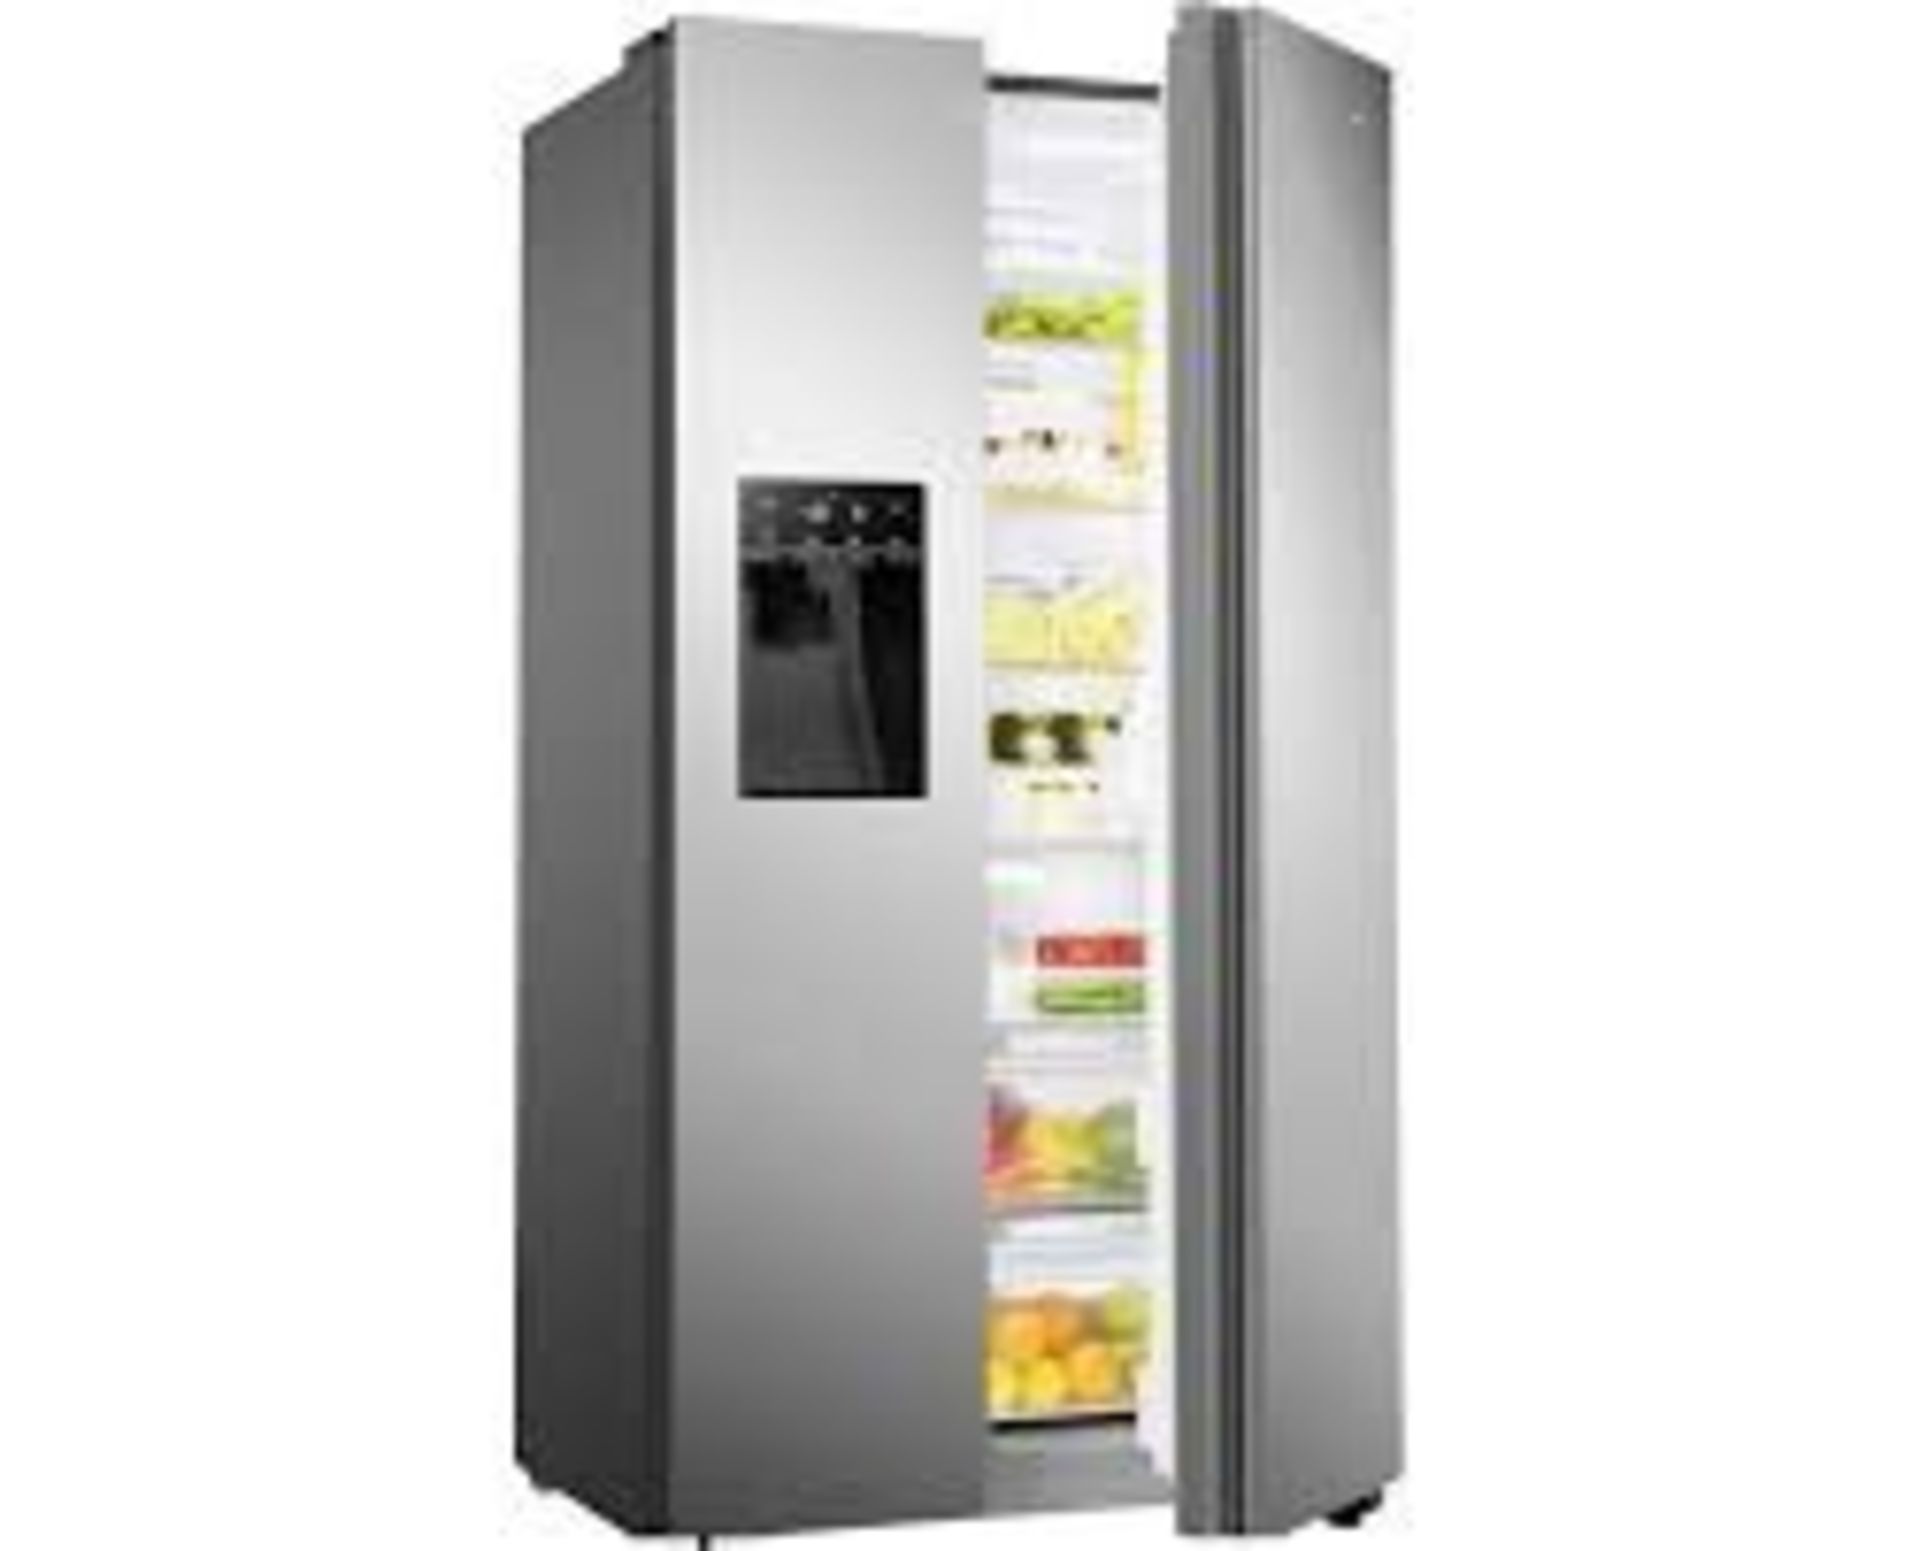 Hisense RS694N4TZF American style Freestanding Frost free Fridge freezer - Stainless steel effect. - - Image 2 of 2